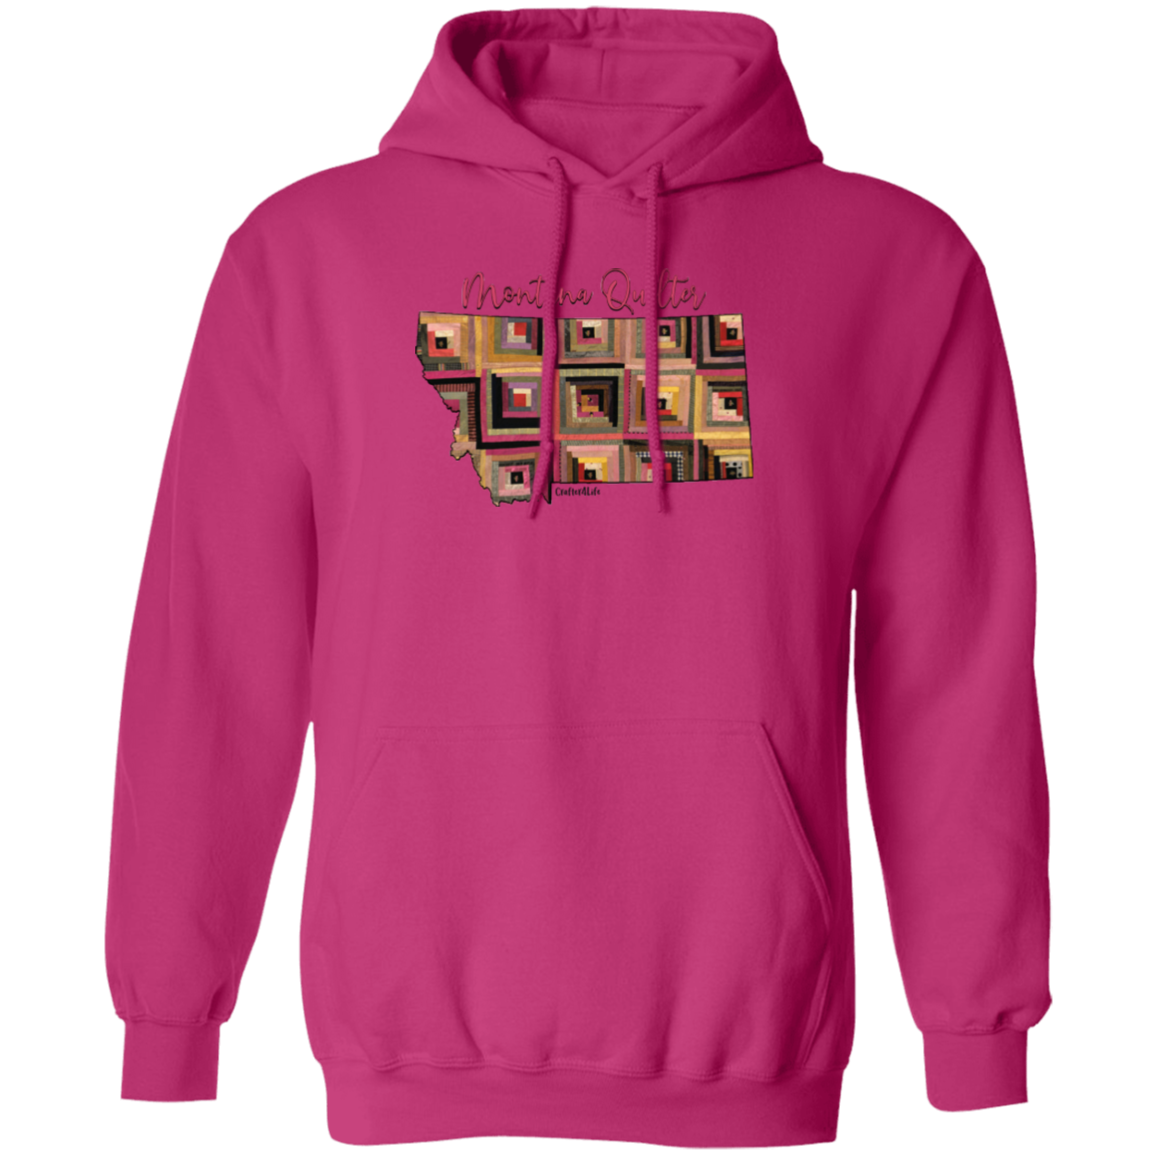 Montana Quilter Pullover Hoodie, Gift for Quilting Friends and Family